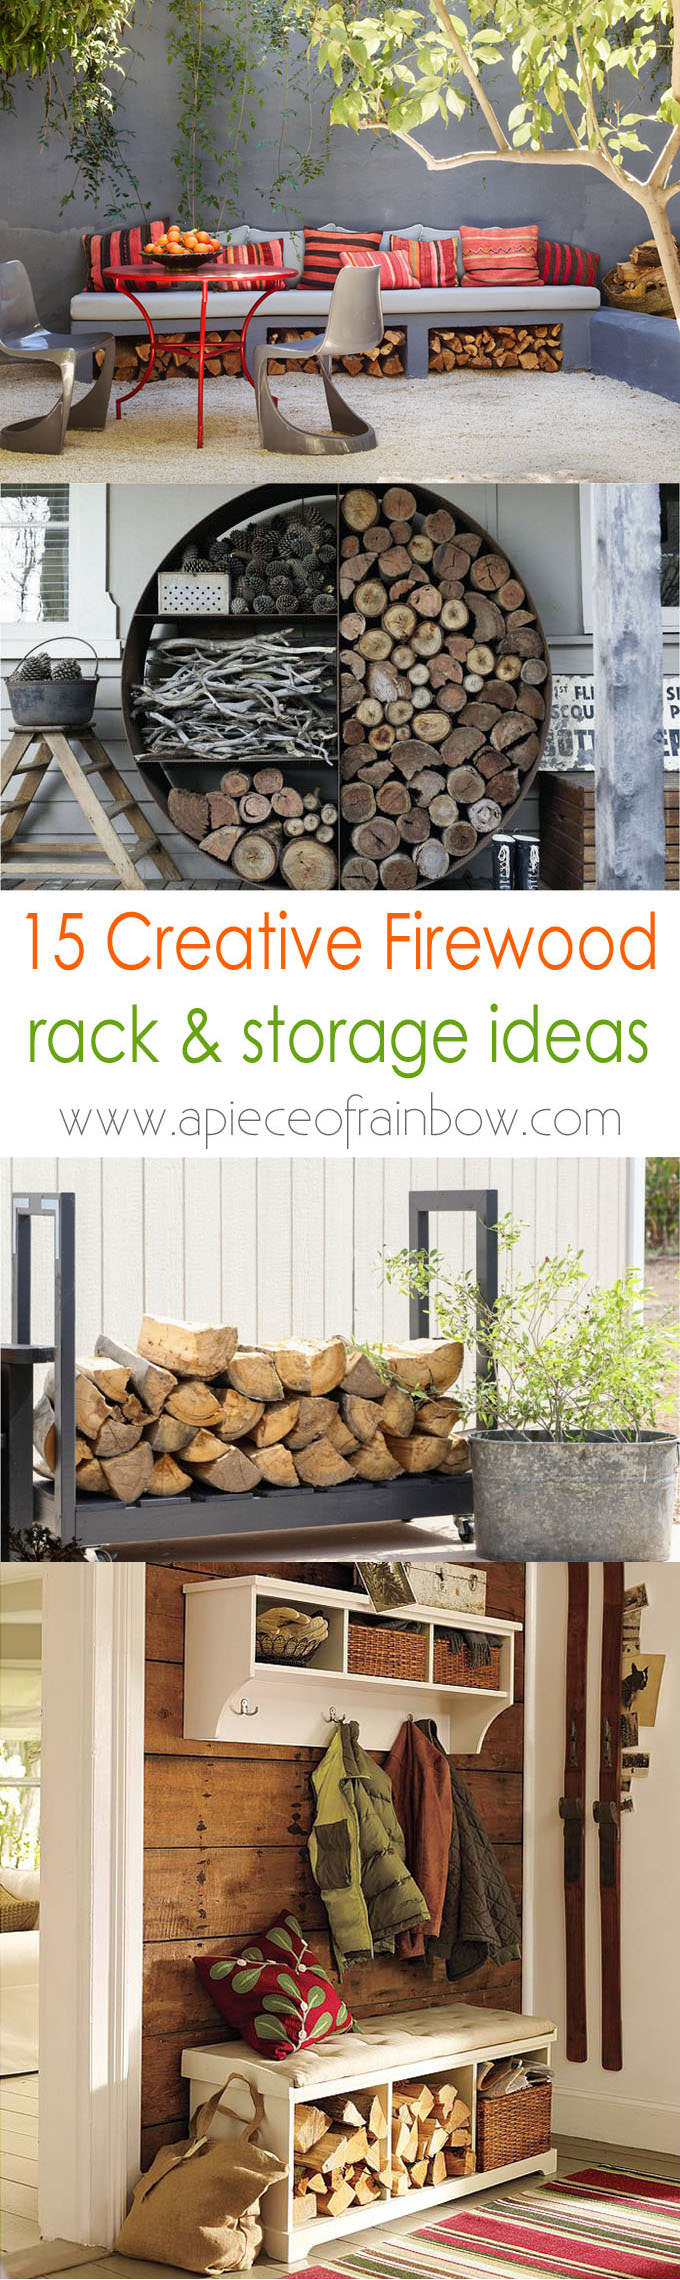 Now when the time is coming for some cozy crackling fire, here are the 15 firewood storage and creative DIY firewood rack ideas for indoors and outdoors.